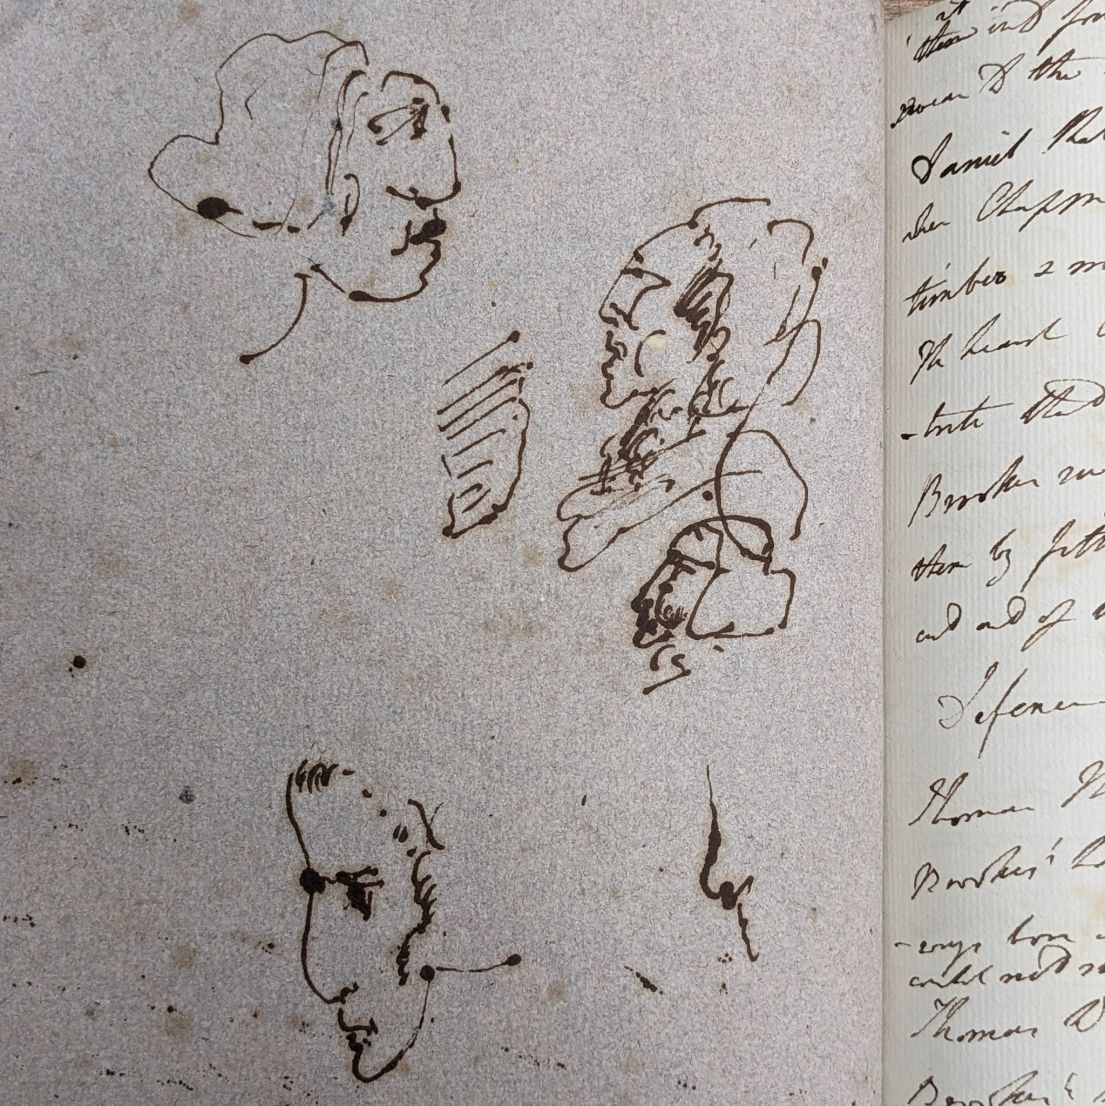 Three sketch of different faces in old ink.